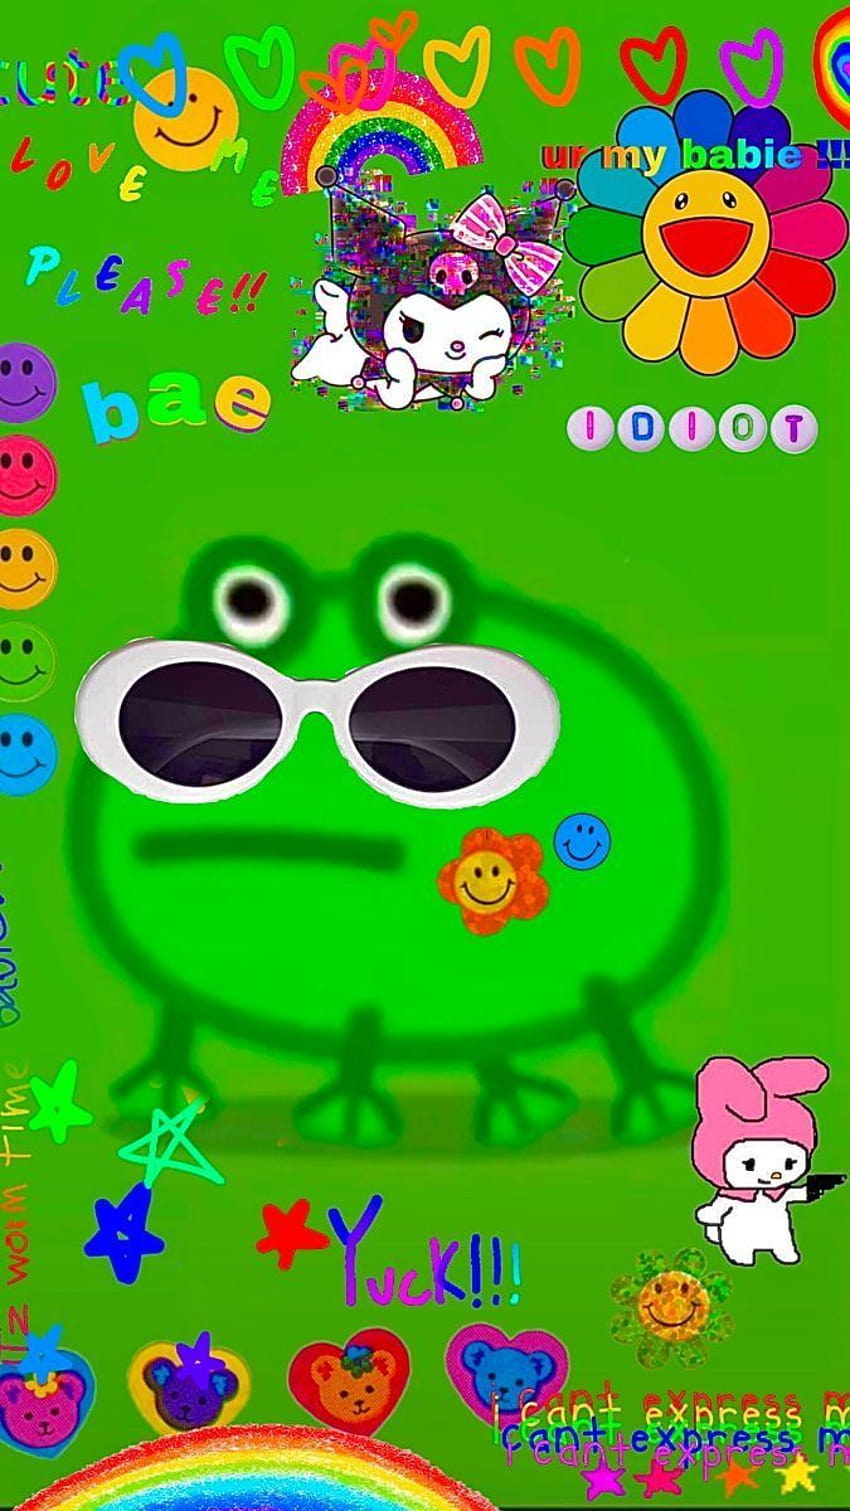 A green frog with sunglasses and other cartoon characters - Frog